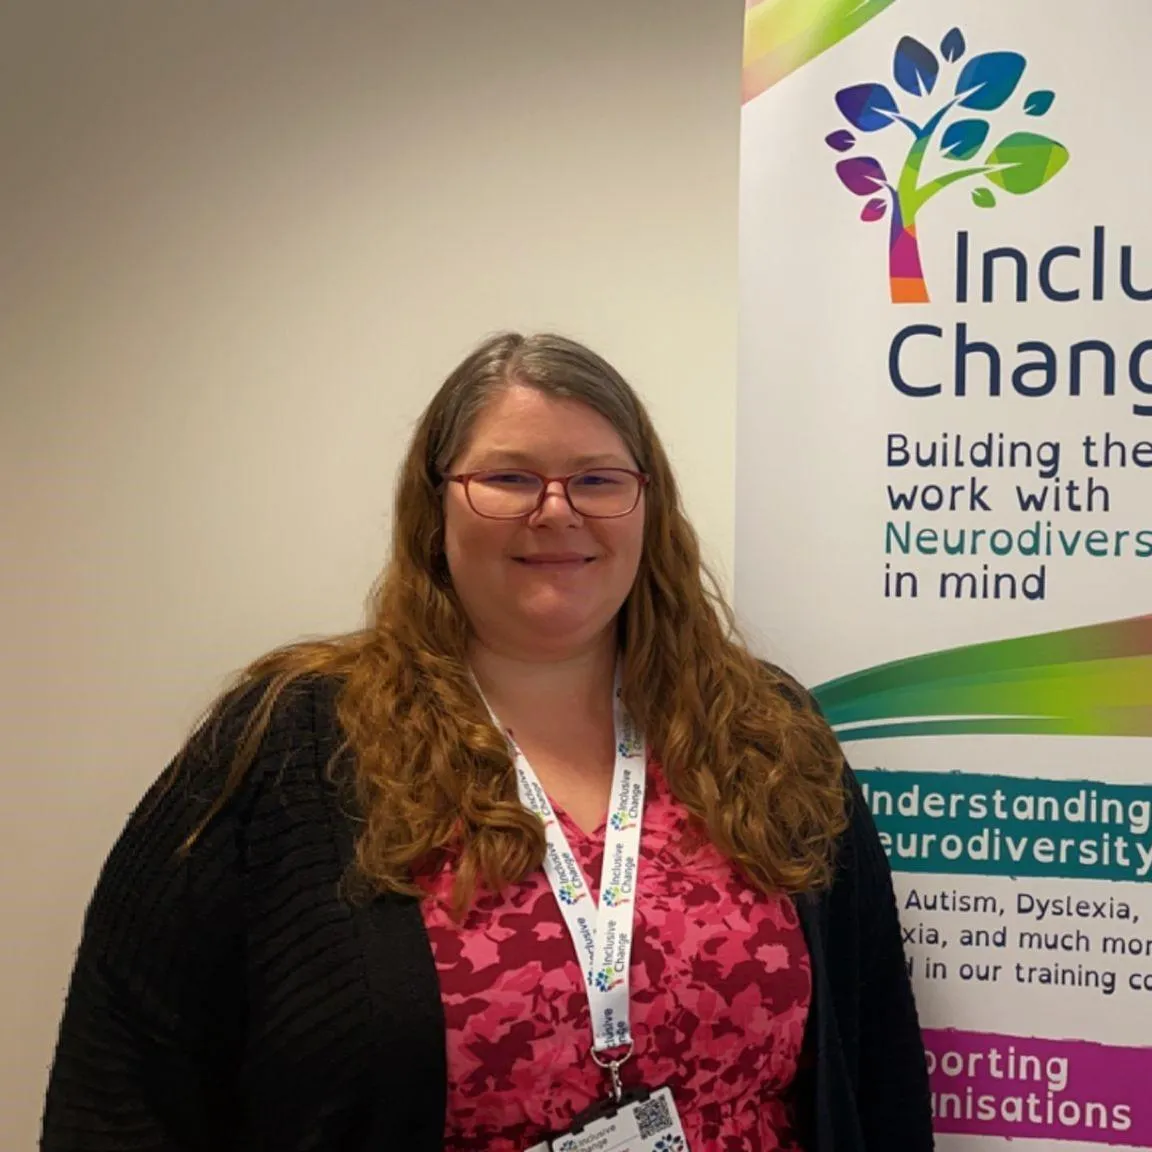 Brown-haired woman with glasses - Kristin Knowler - Inclusive Change at Work CIC